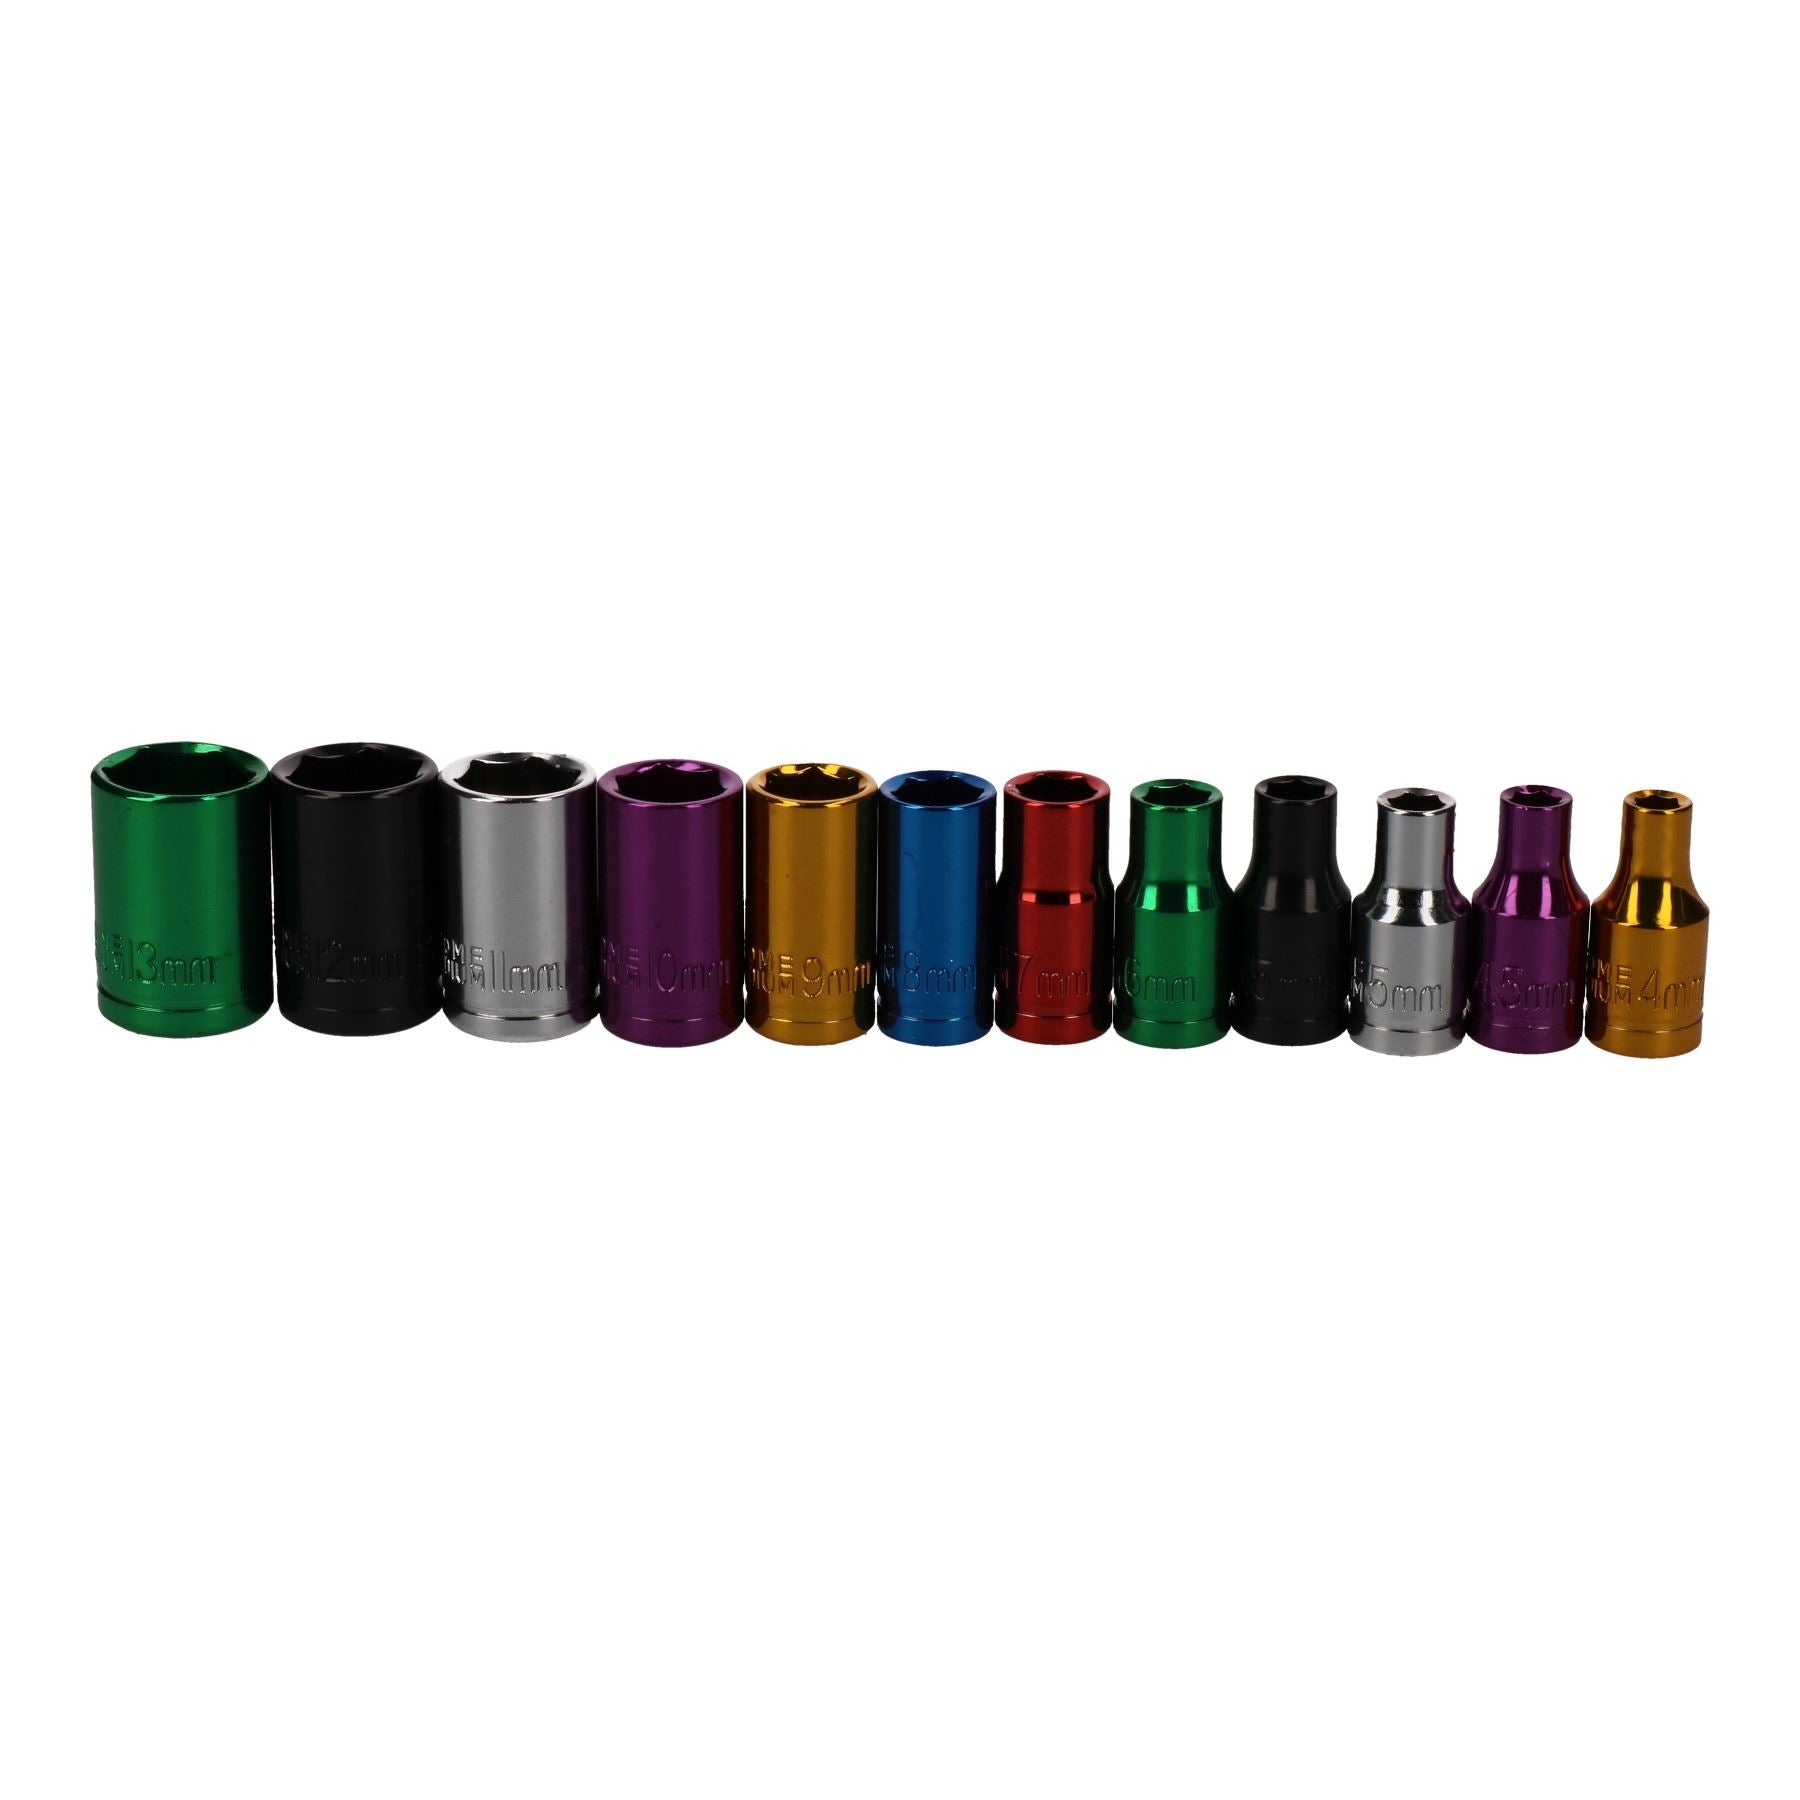 12pc Coloured 1/4" Dr Shallow Sockets 6 Point Hex Metric 4 - 13mm With Rail